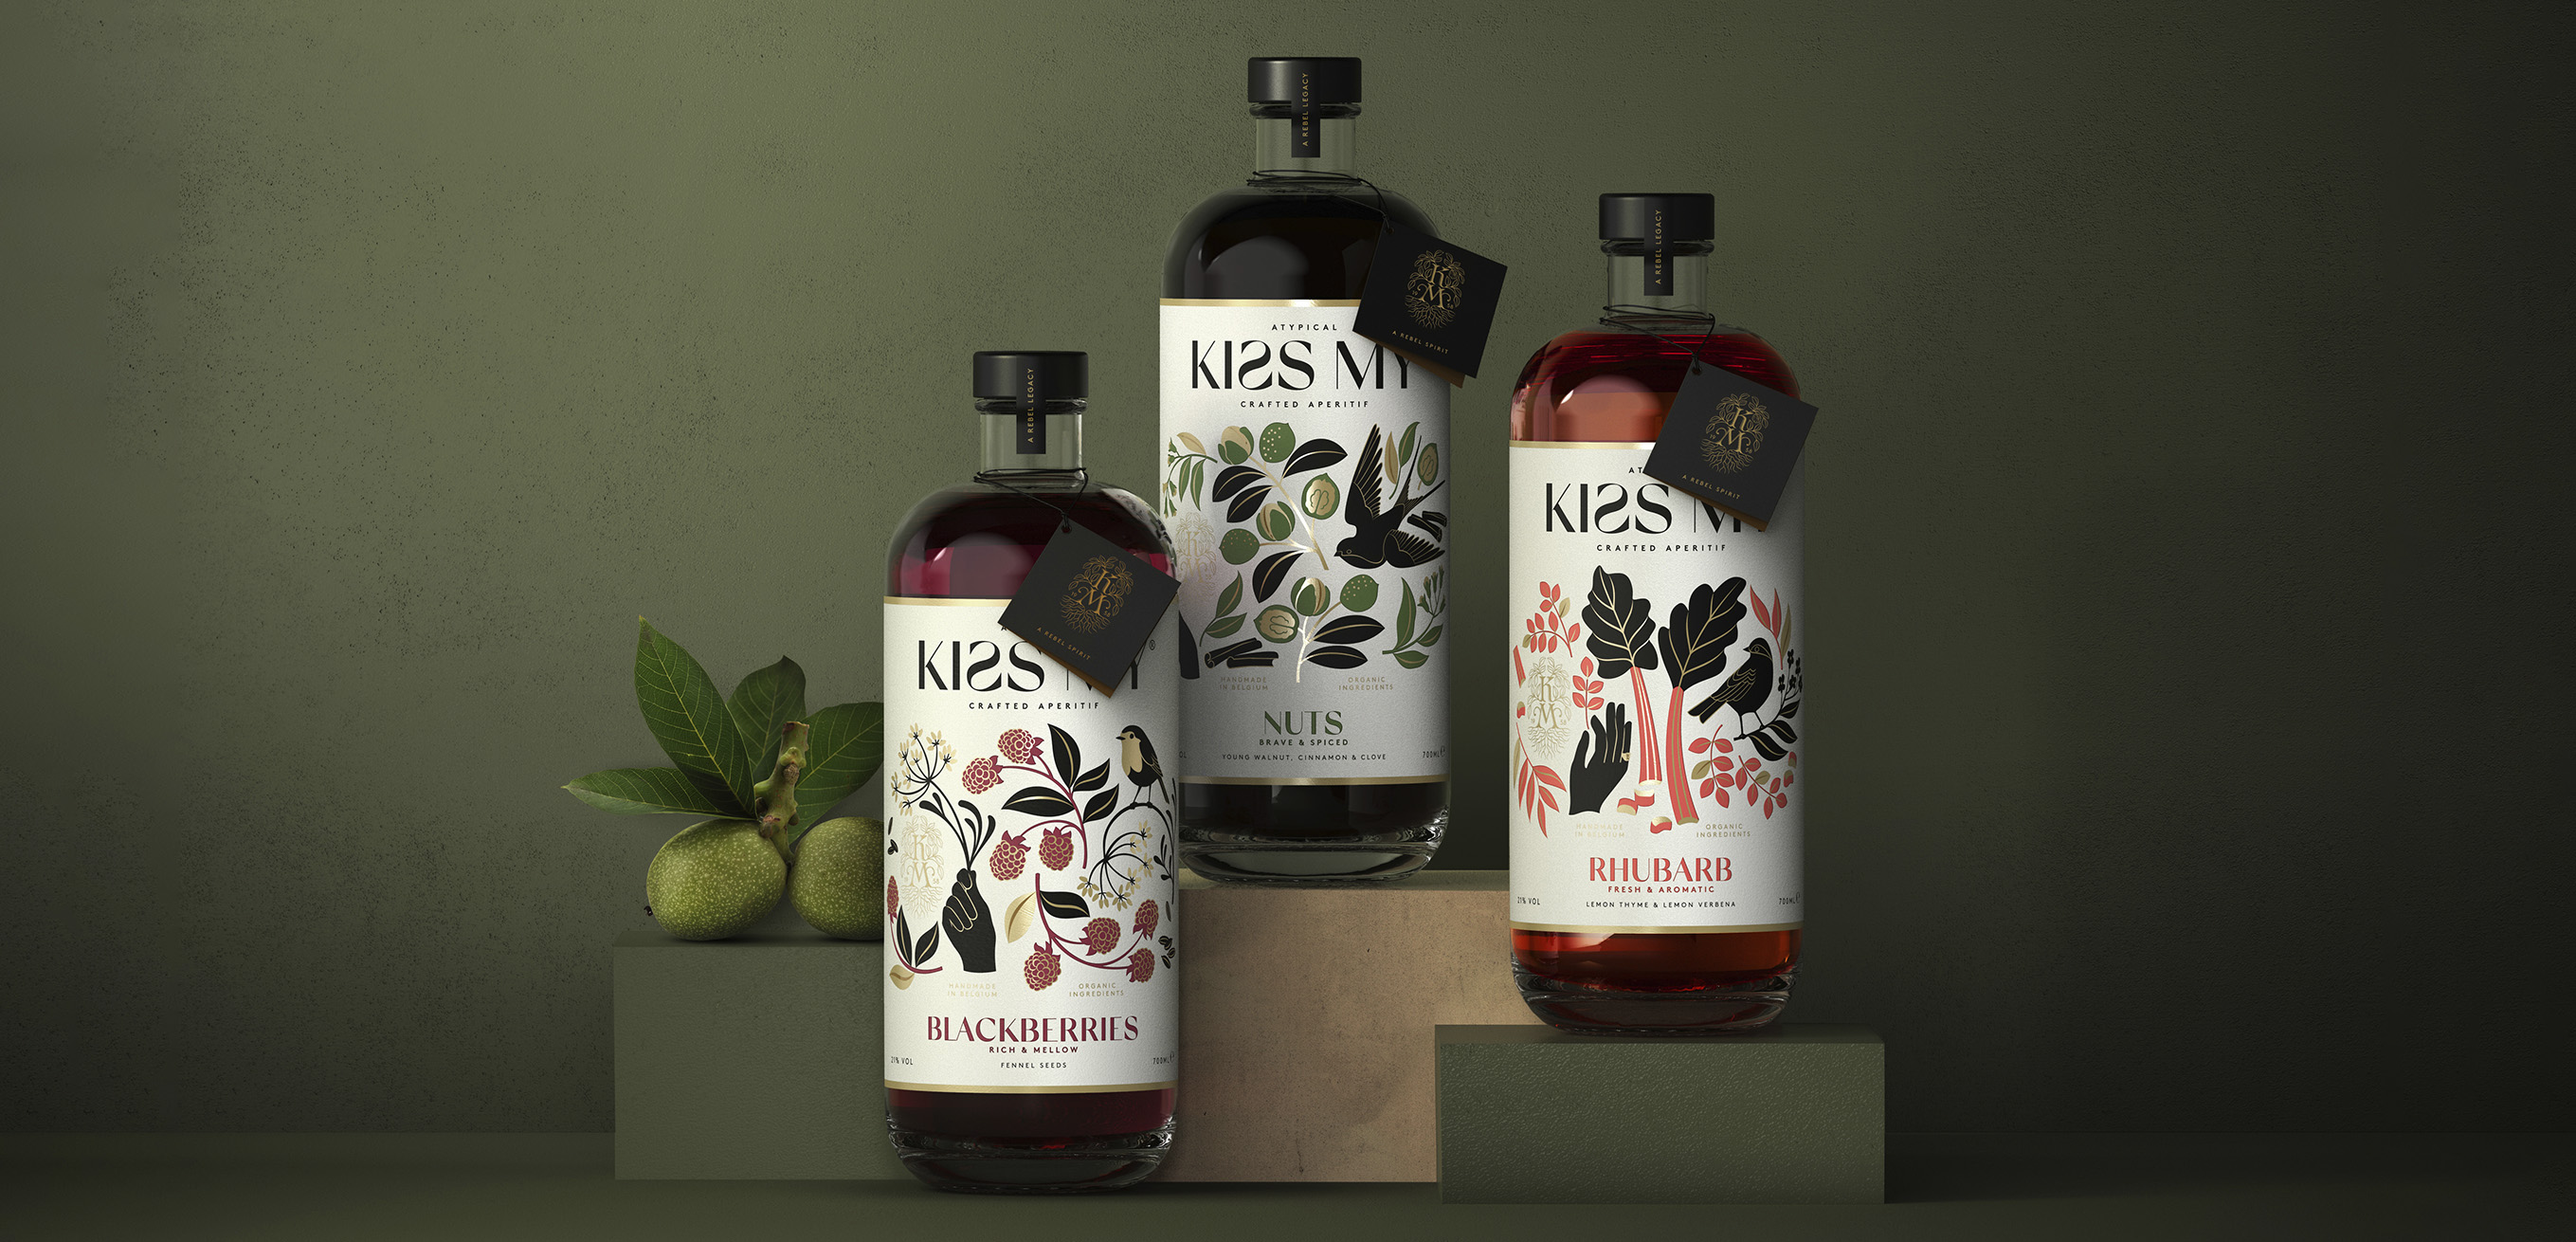 Pearlfisher Creates Brand Identity and Packaging Design “Kiss My”